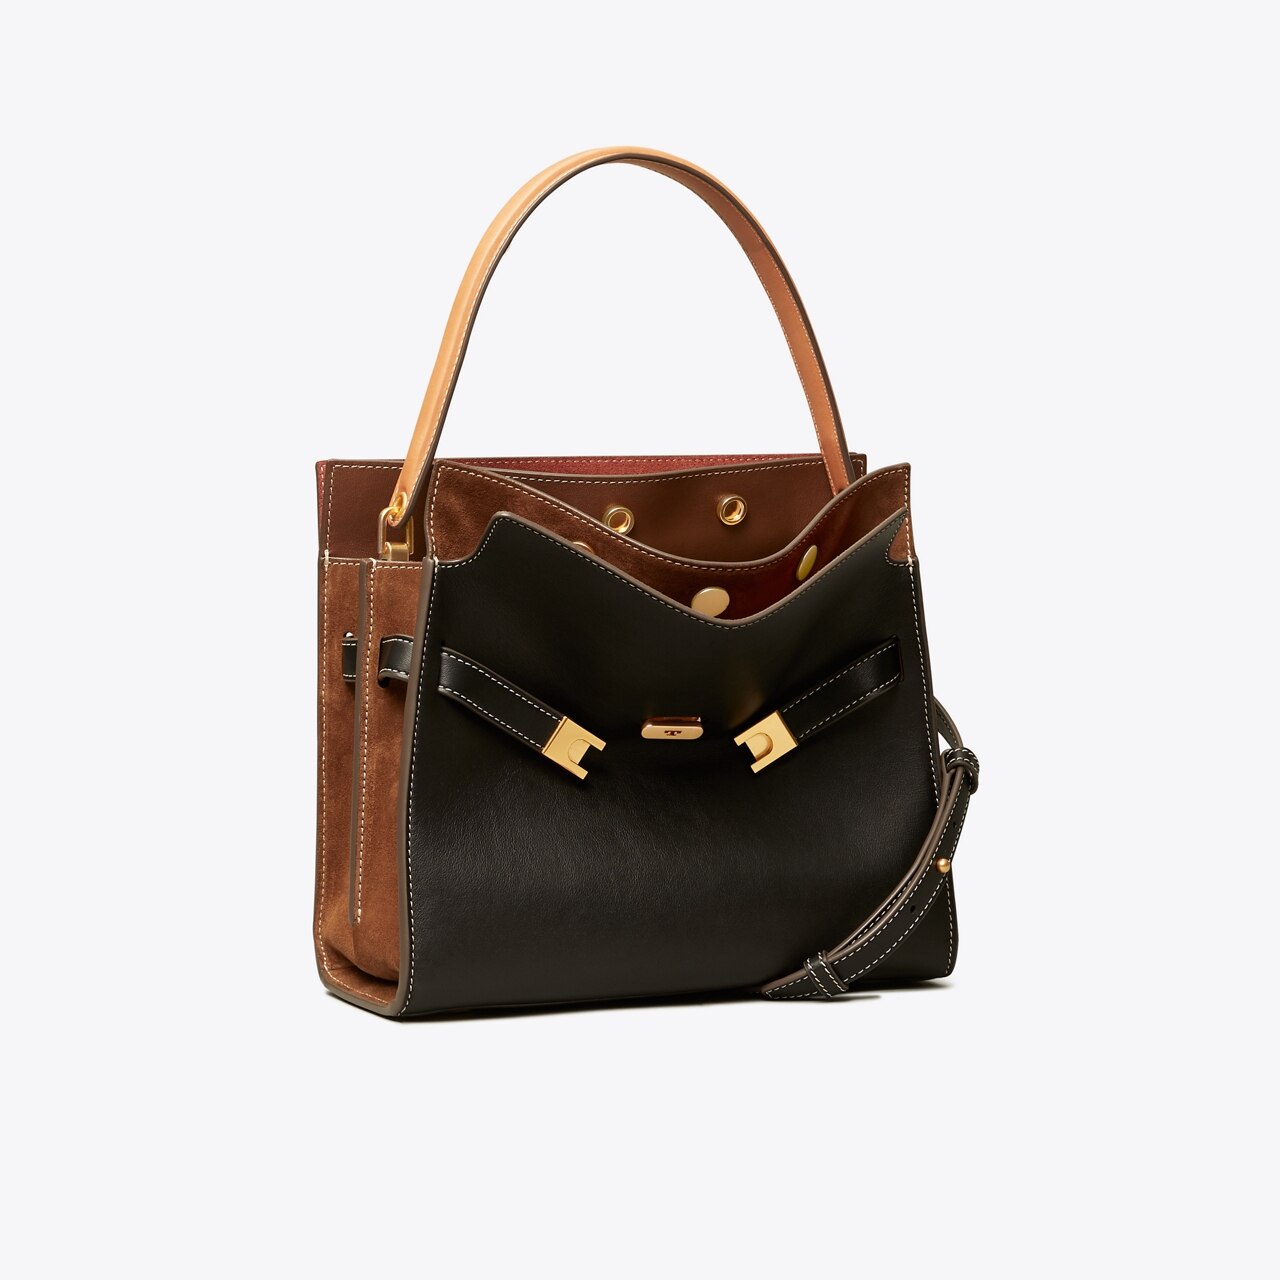 My new bag. She is gorgeous. Tory Burch small Lee Radziwill. The